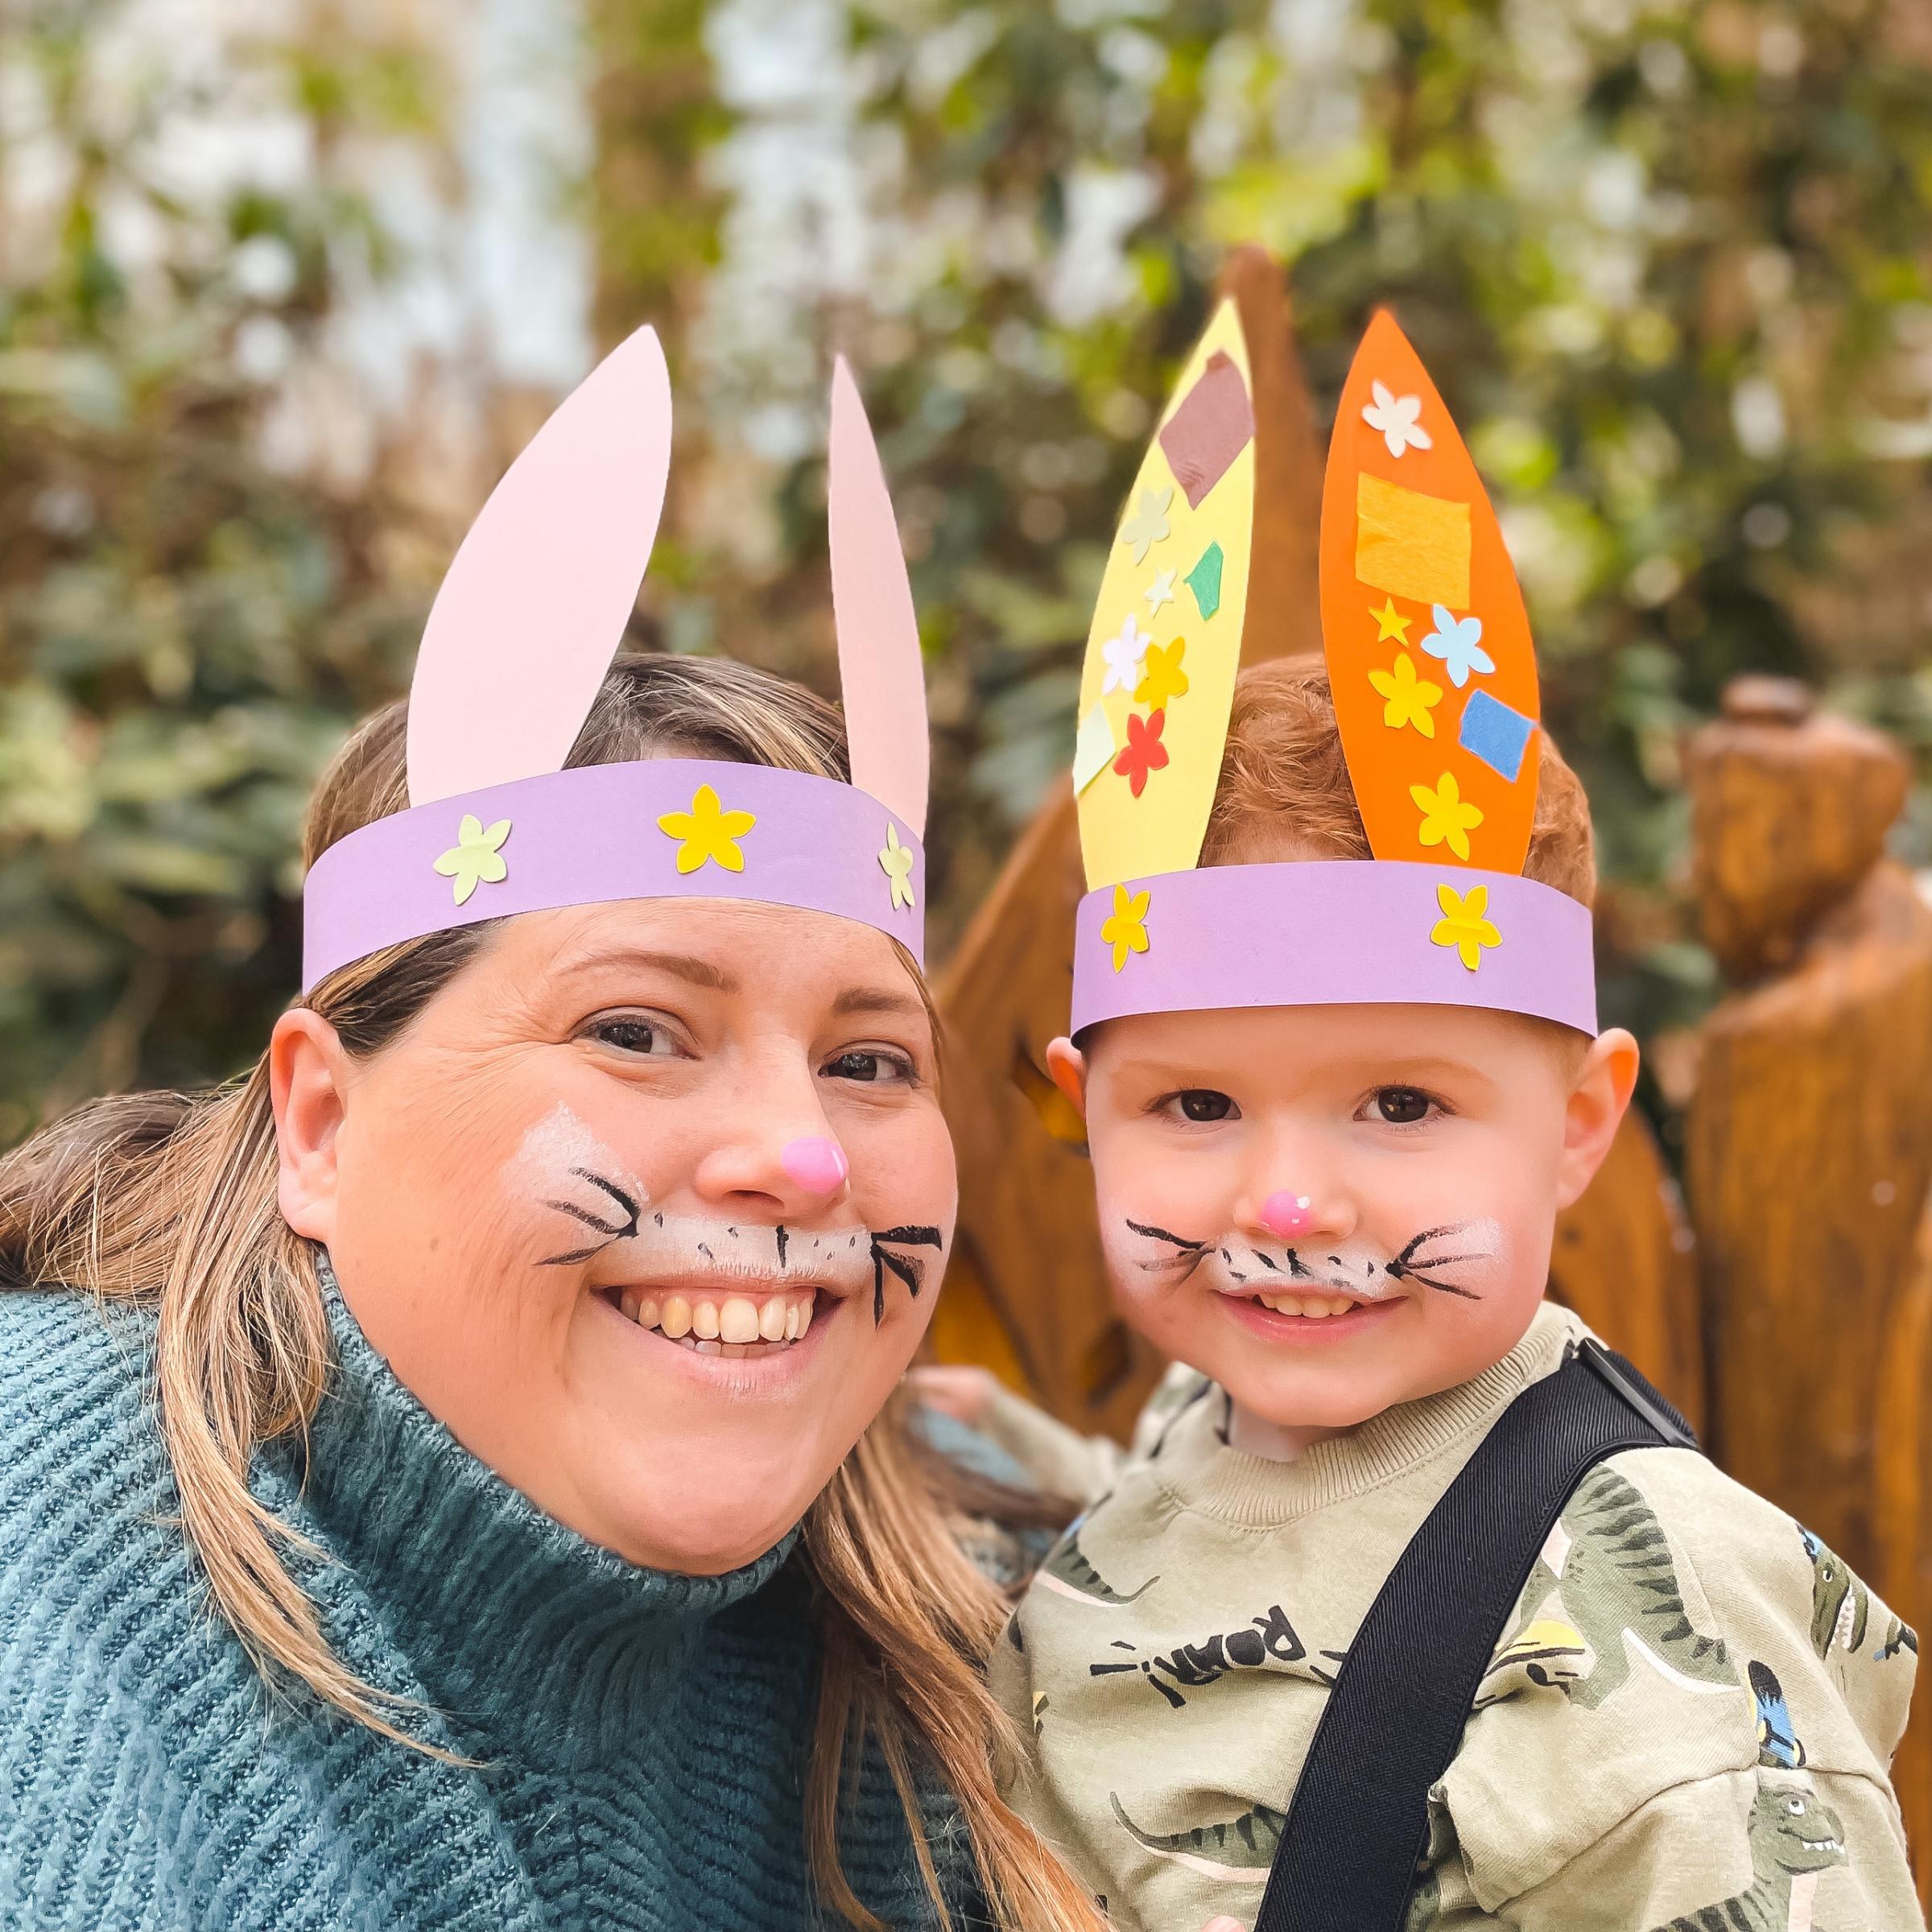 Easter craft activities and face painting will be available during the holidays